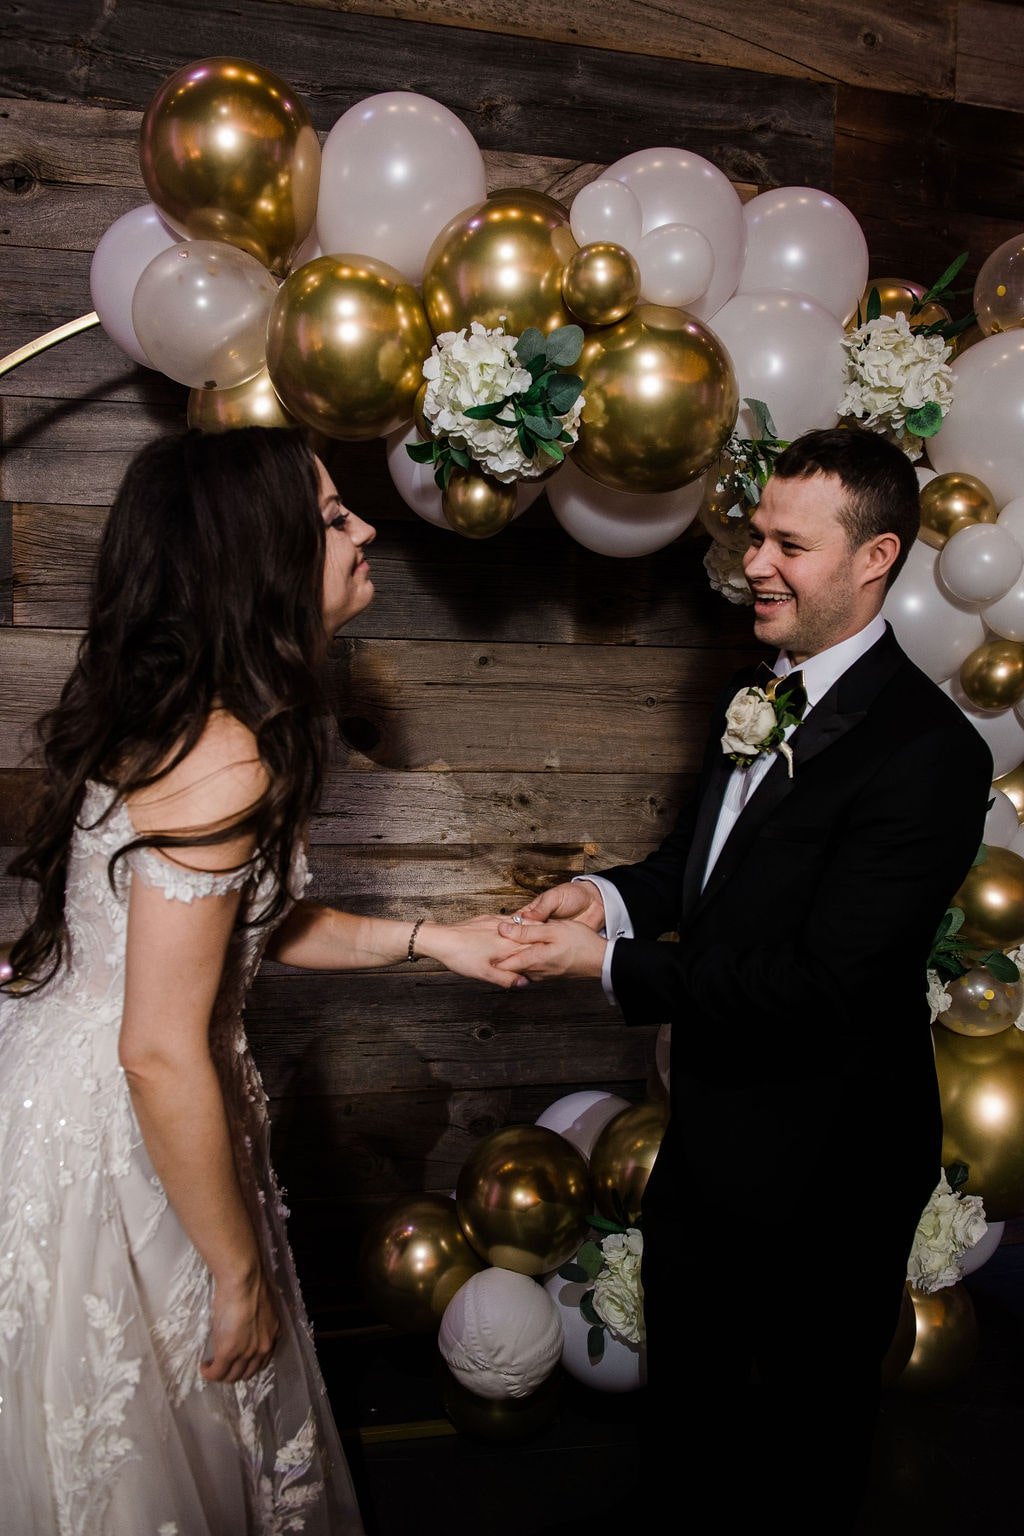 Wedding ceremony with gold and white balloon wedding arch